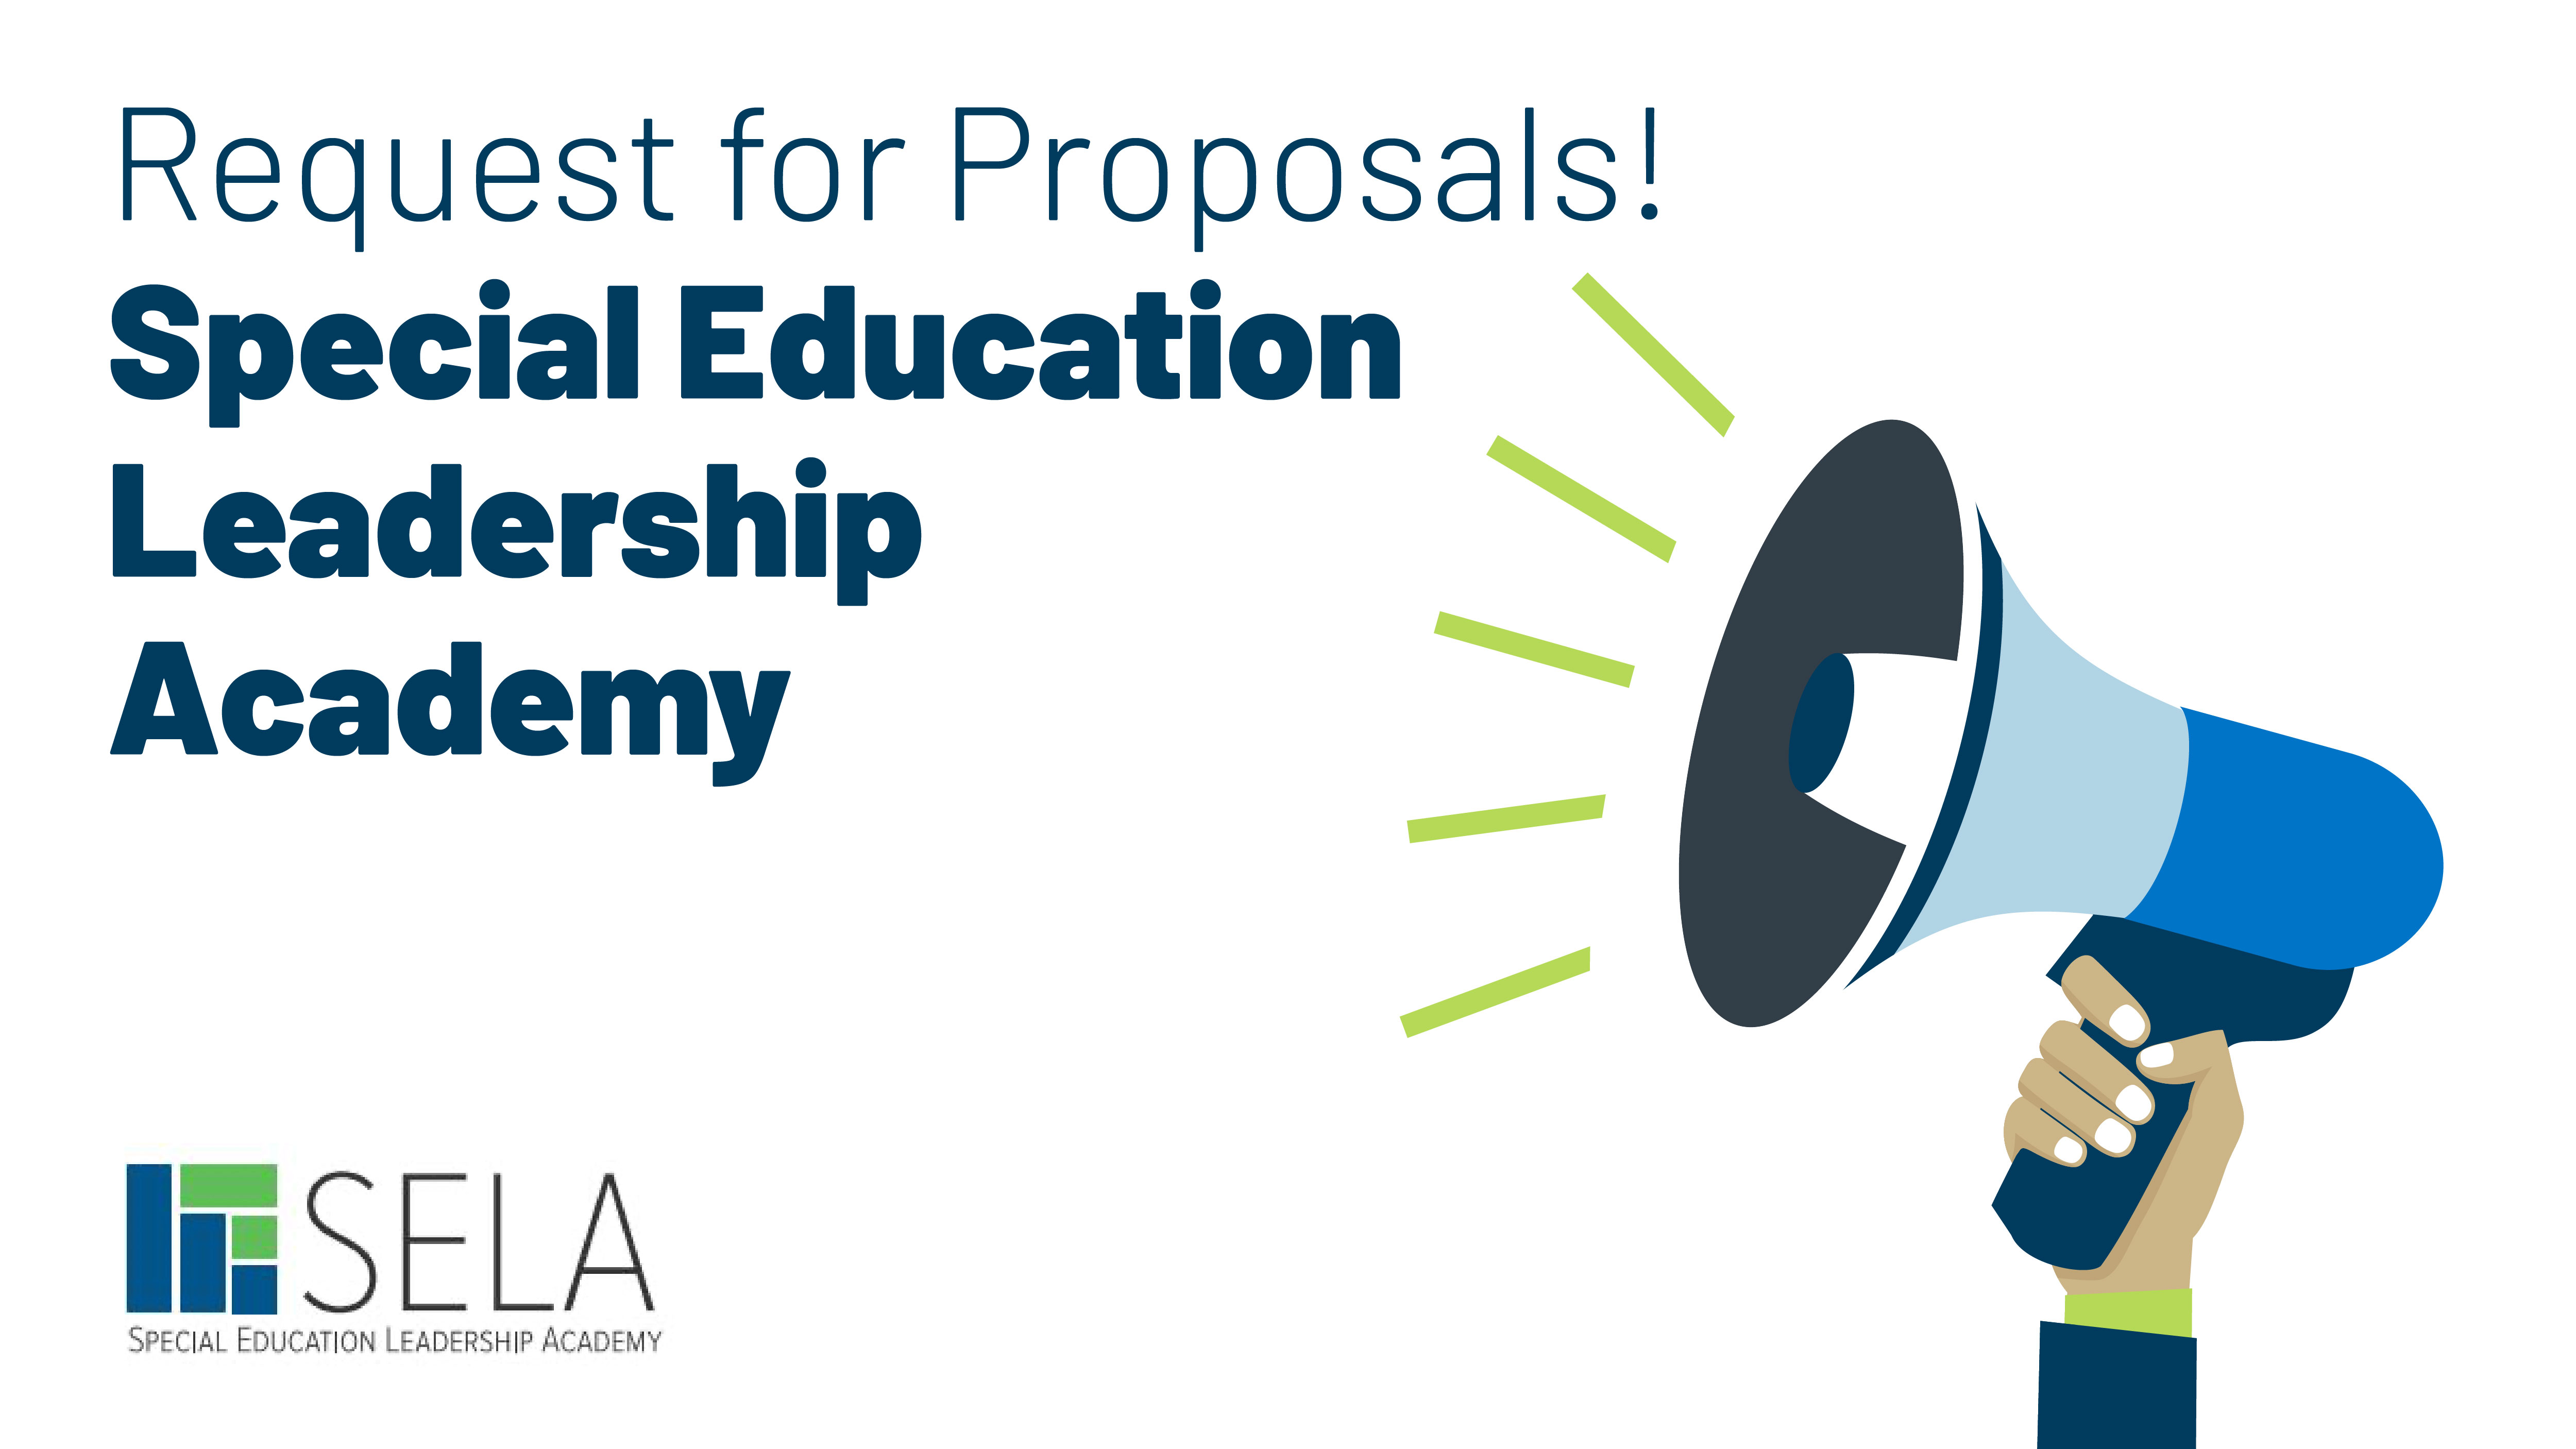 Request for proposals. Special Education Leadership Academy. Special Education Leadership Academy logo and megaphone graphic